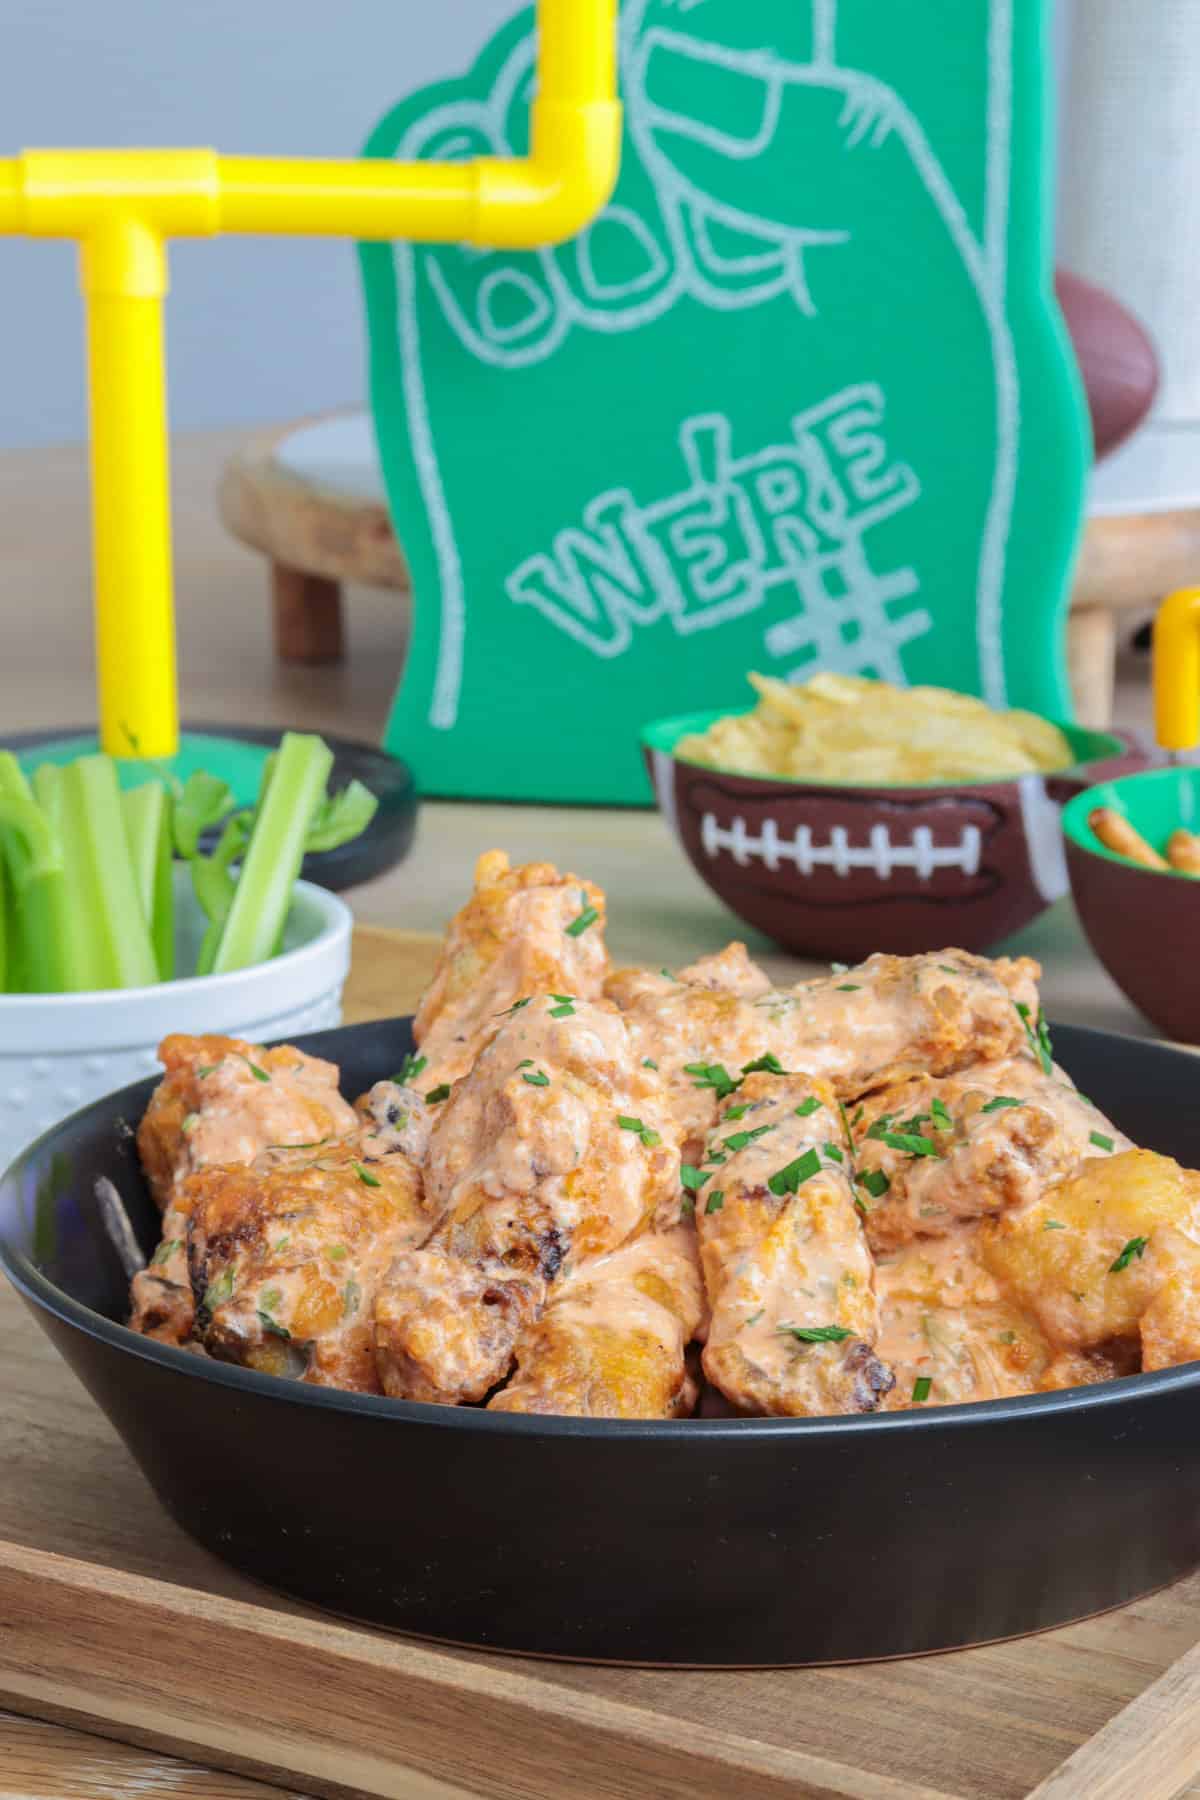 Football appetizer table with chicken wings and chips.